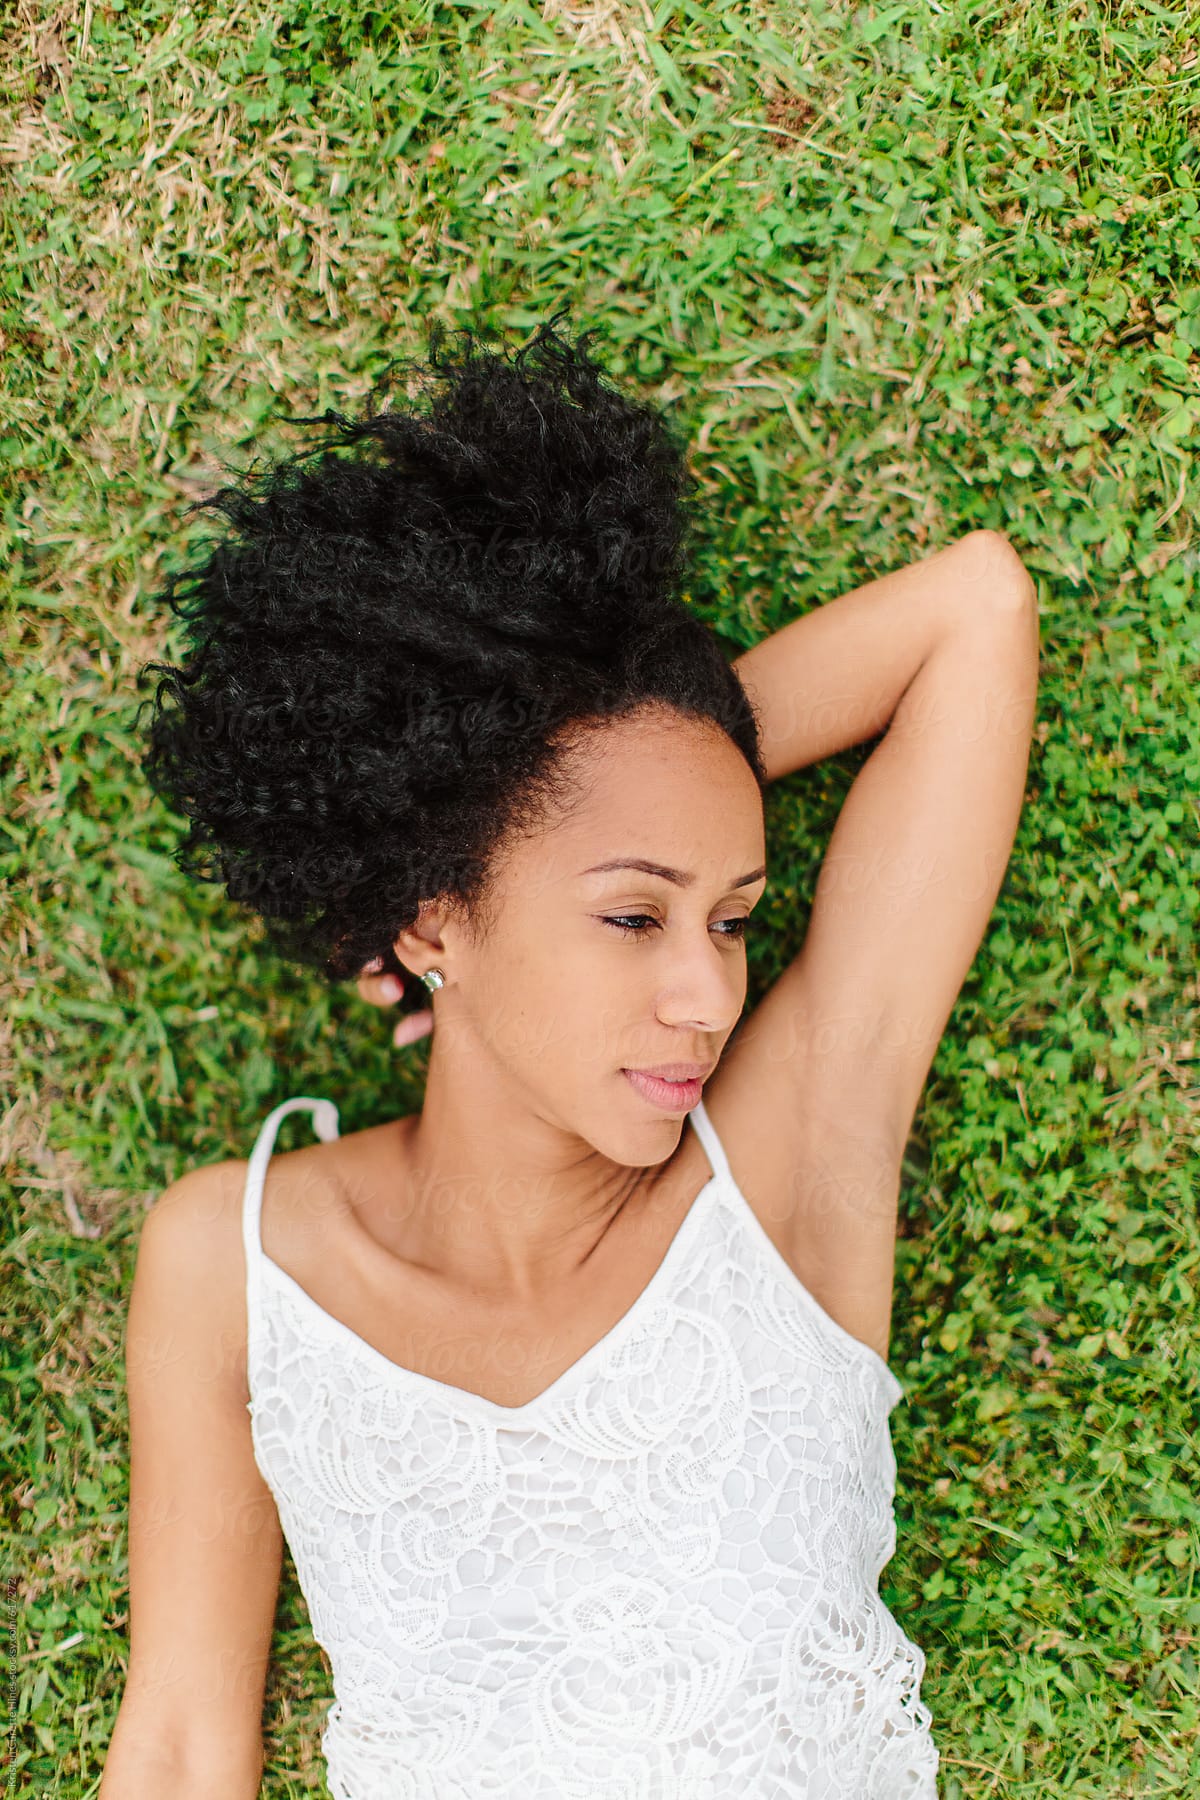 A Beautiful Woman With Curly Hair Laying Down In The Grass Daydreaming